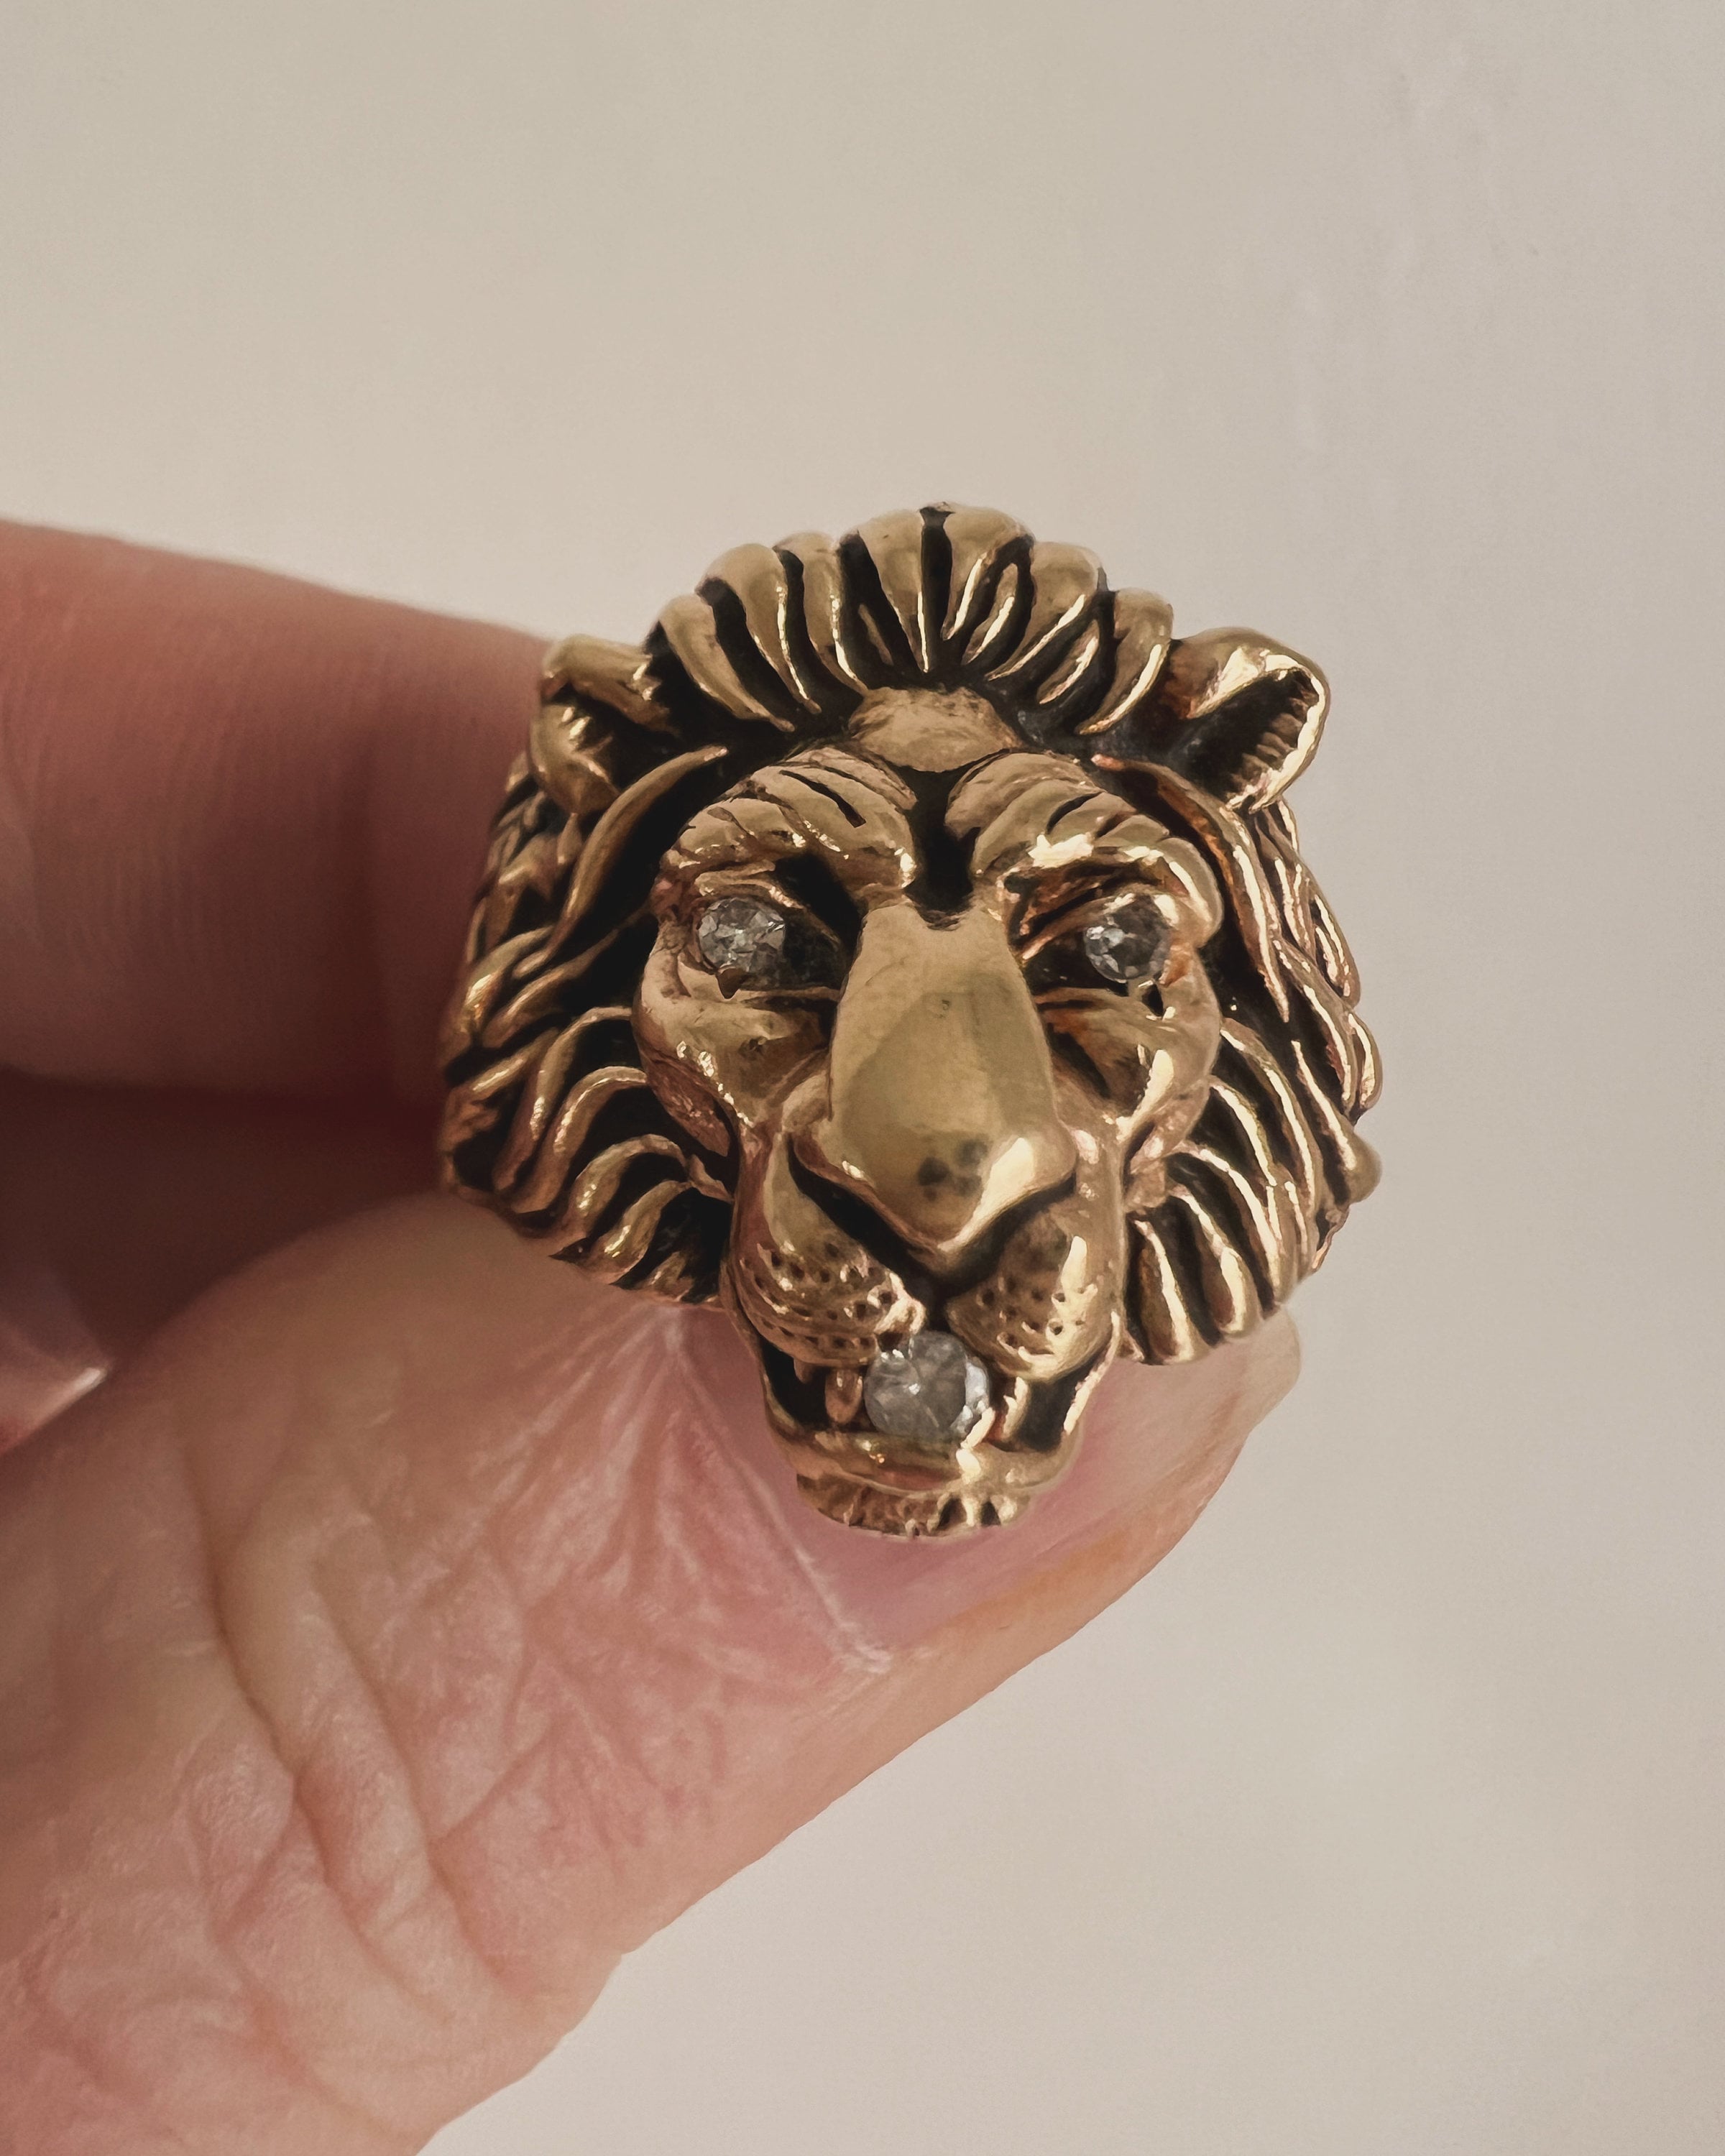 Vintage 10K Yellow Gold Lion Ring with Diamonds.